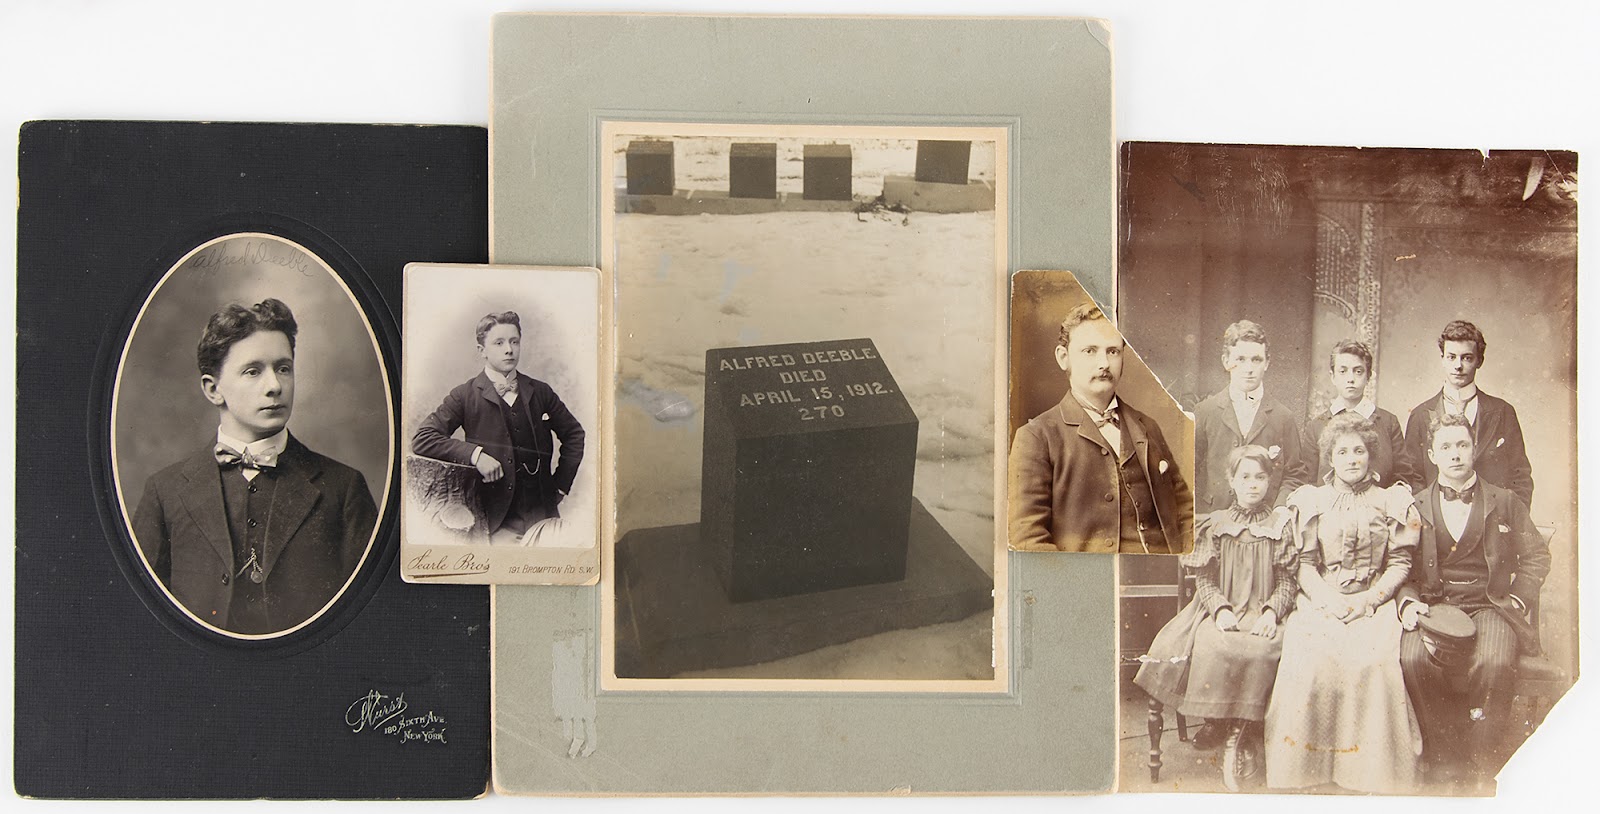 Original photographs from Deeble’s family depict him in three portraits (two leftmost and second from the right), his grave marker in Nova Scotia (center), and a family photo of Alfred alongside his siblings Lily, Ada, Albert, Ernest, and Charles (right).